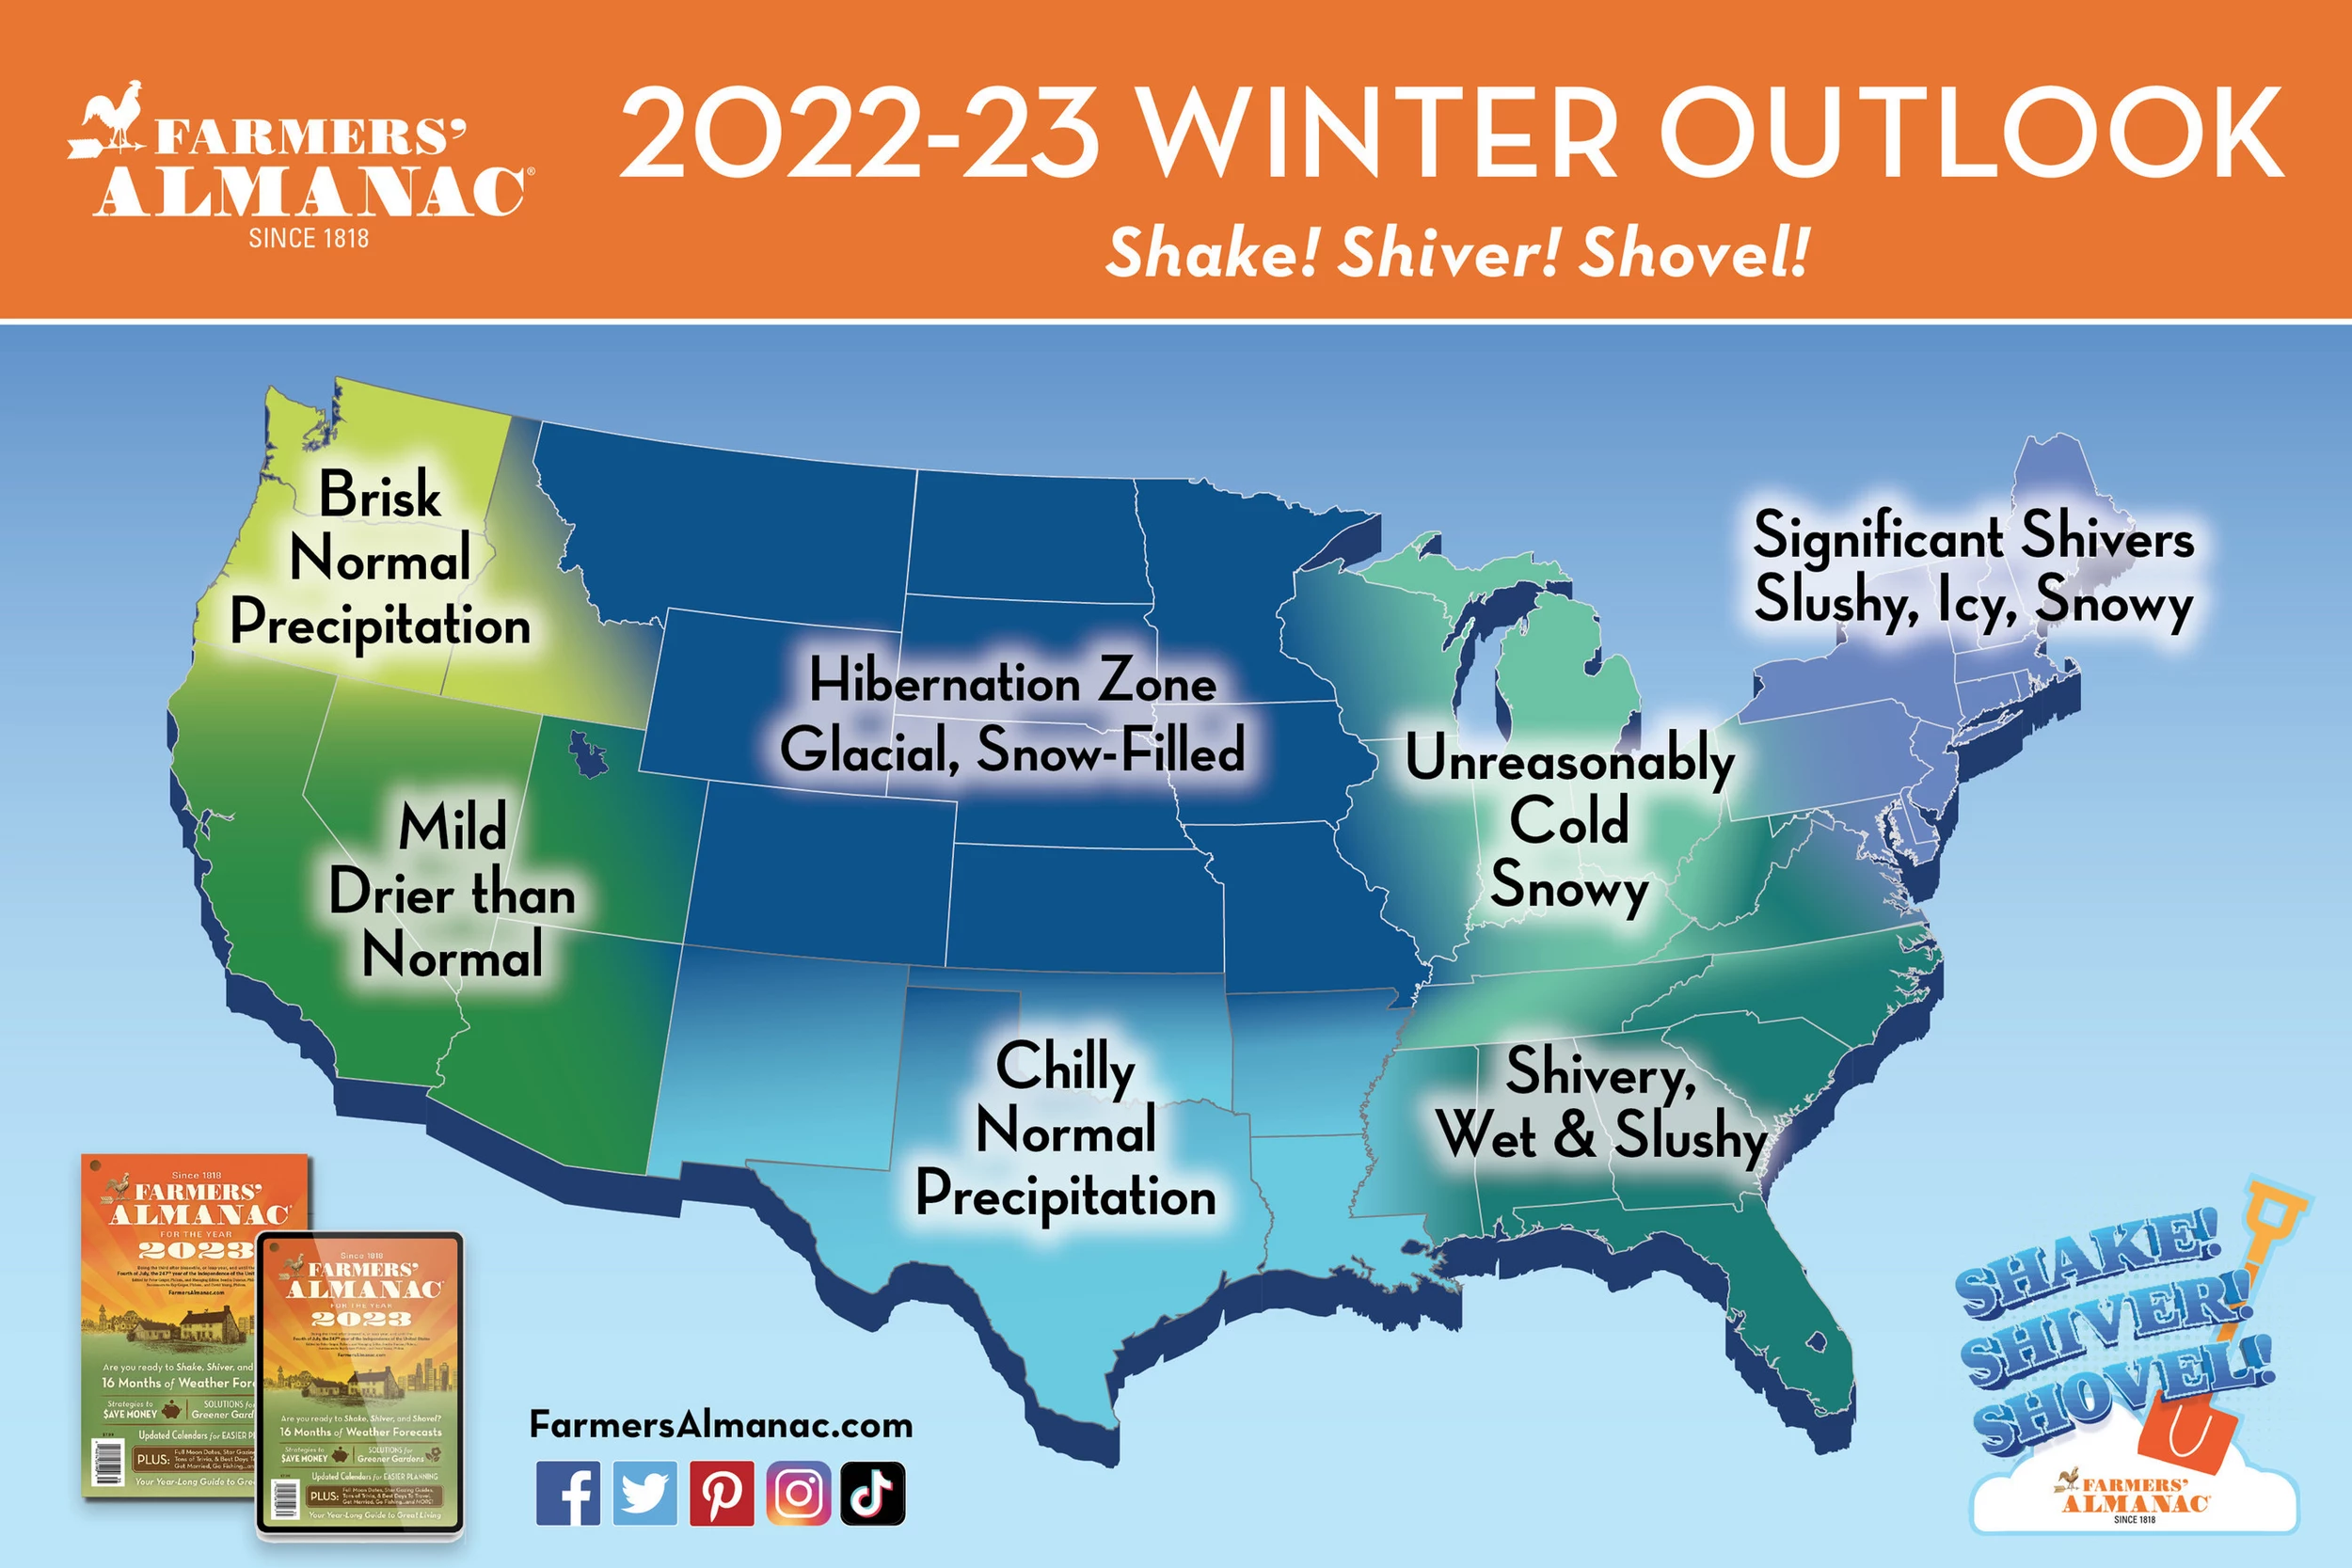 Farmers Almanac Says Iowa Better Be Ready For COLD This Winter